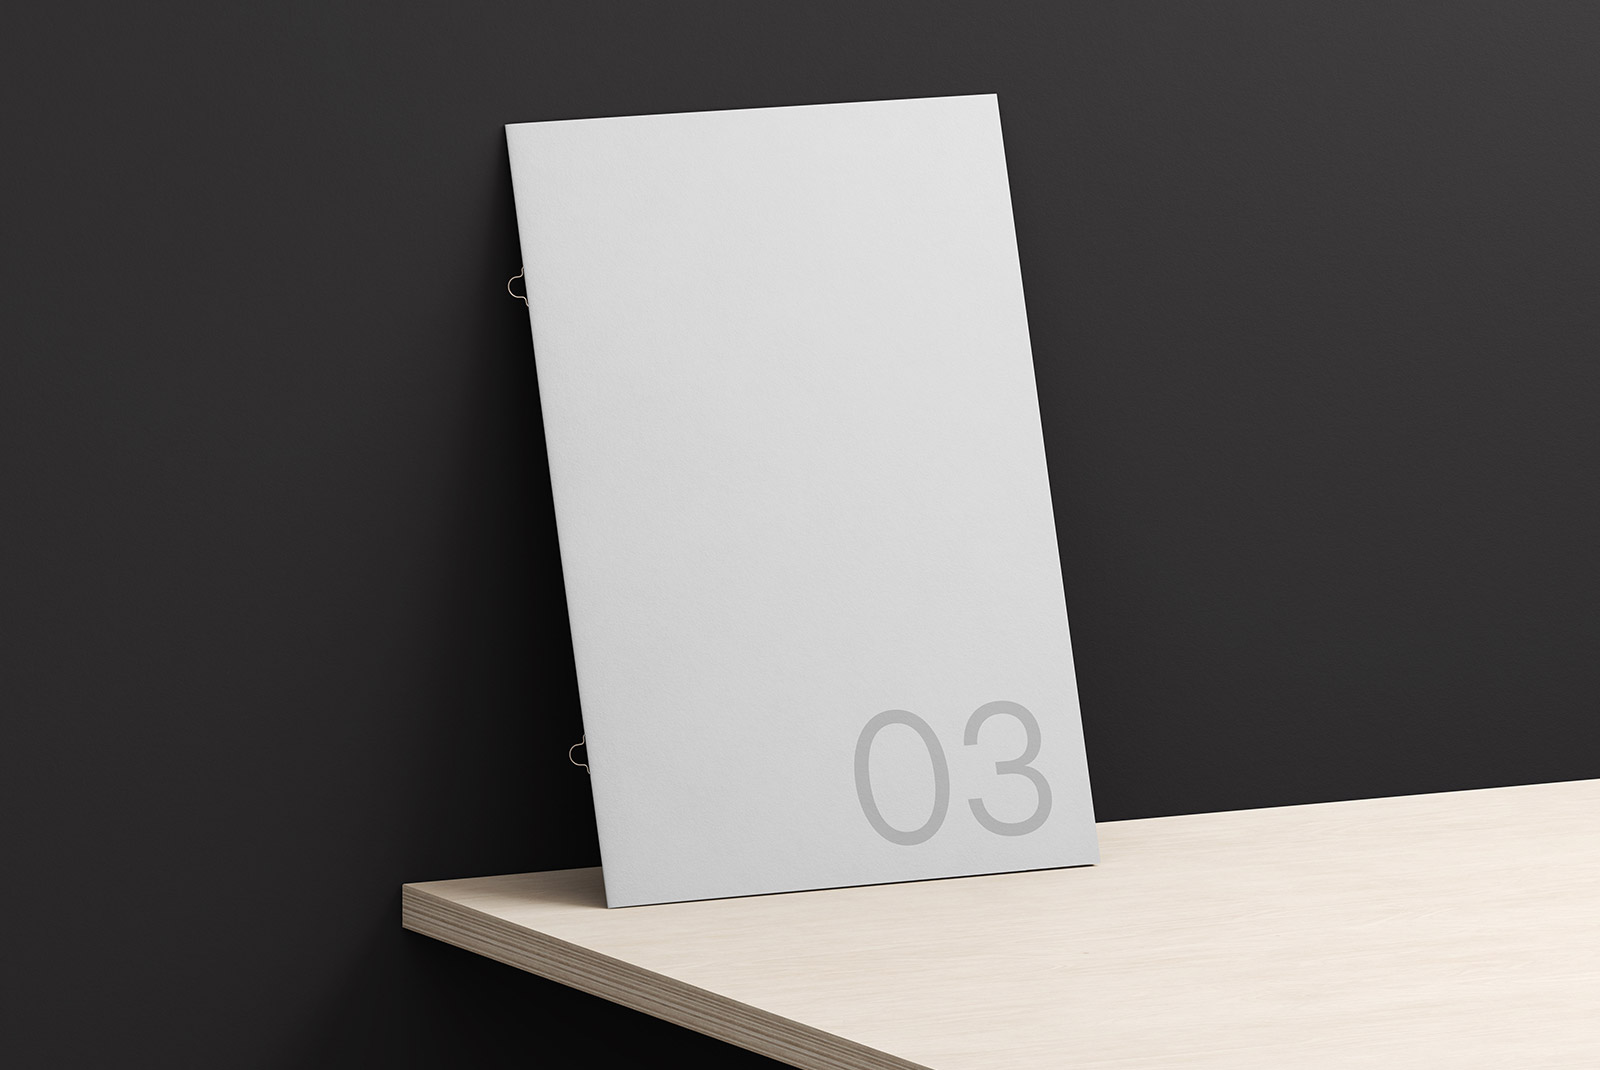 Elegant paper mockup leaning against a dark wall on a wooden shelf, with minimalistic numbering for presentation and design display.